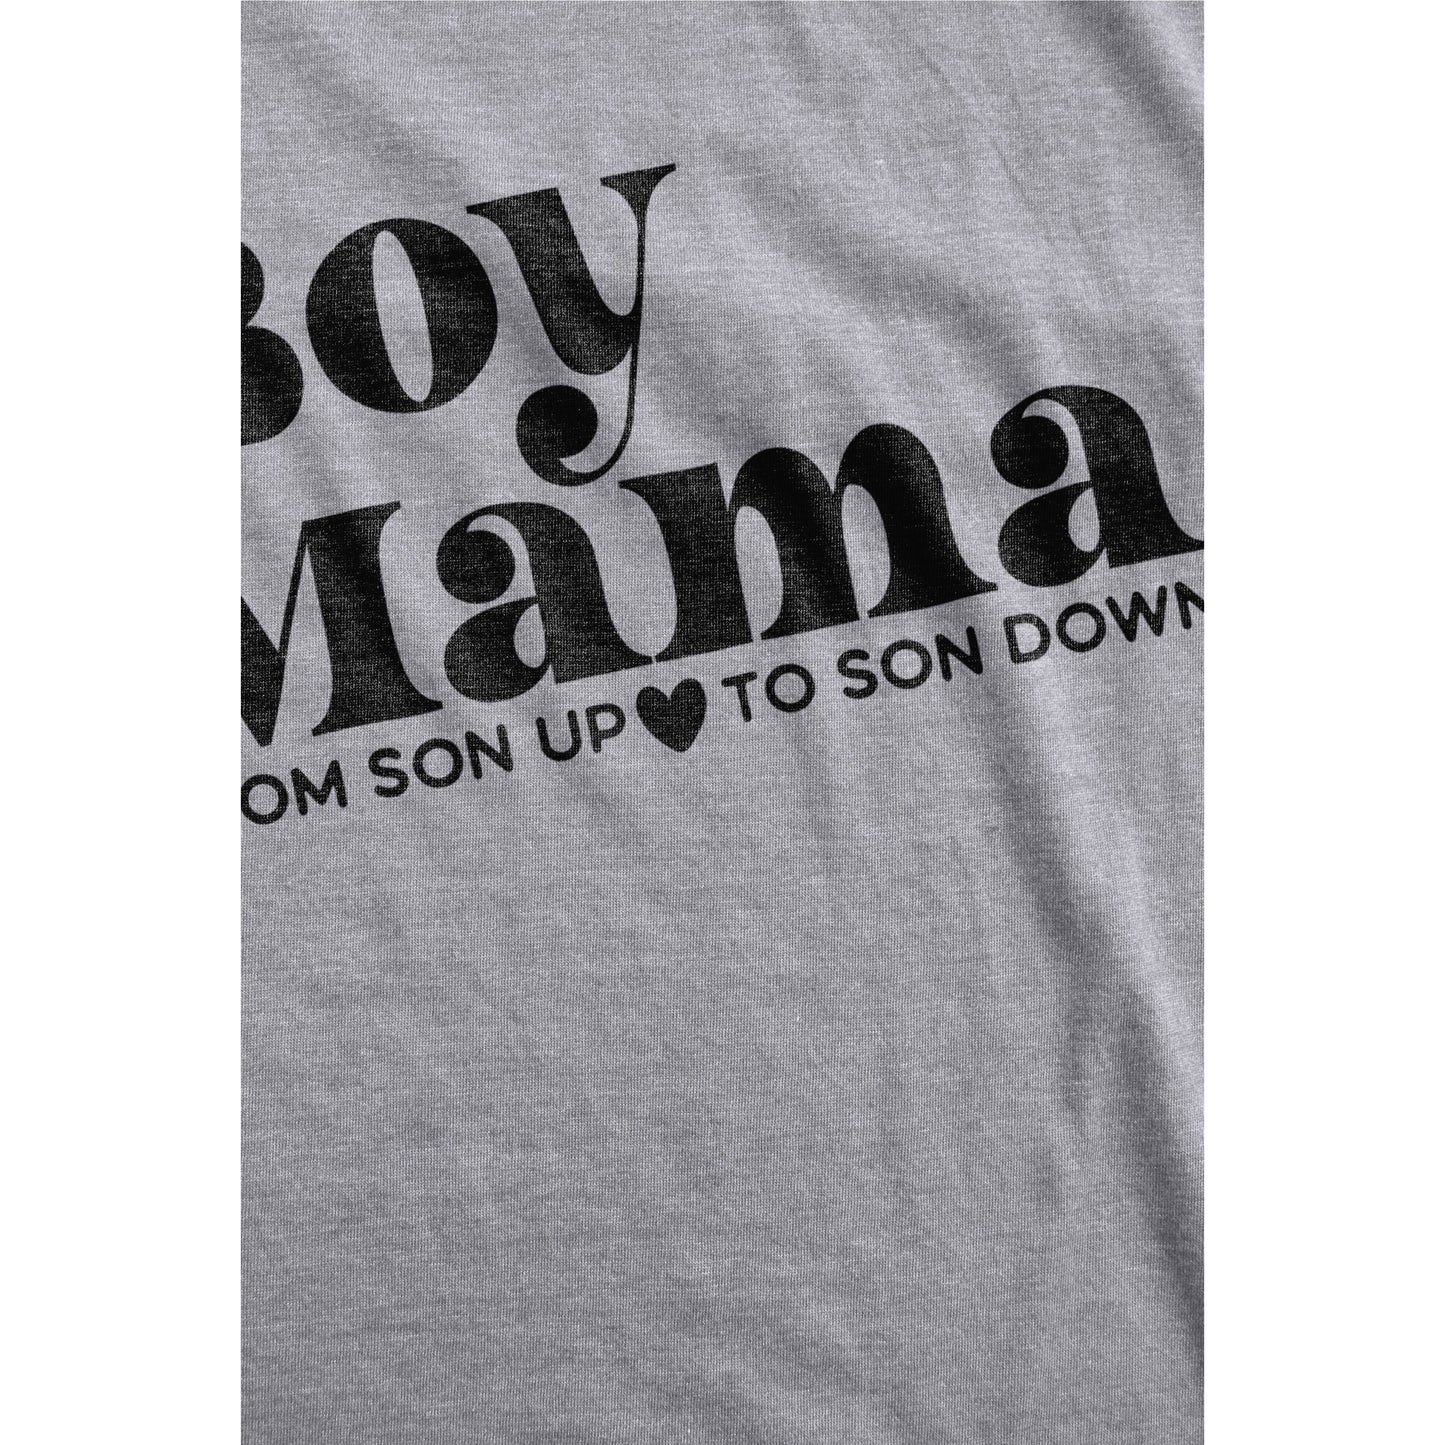 Boy Mama Son Up to Son Down - threadtank | stories you can wear